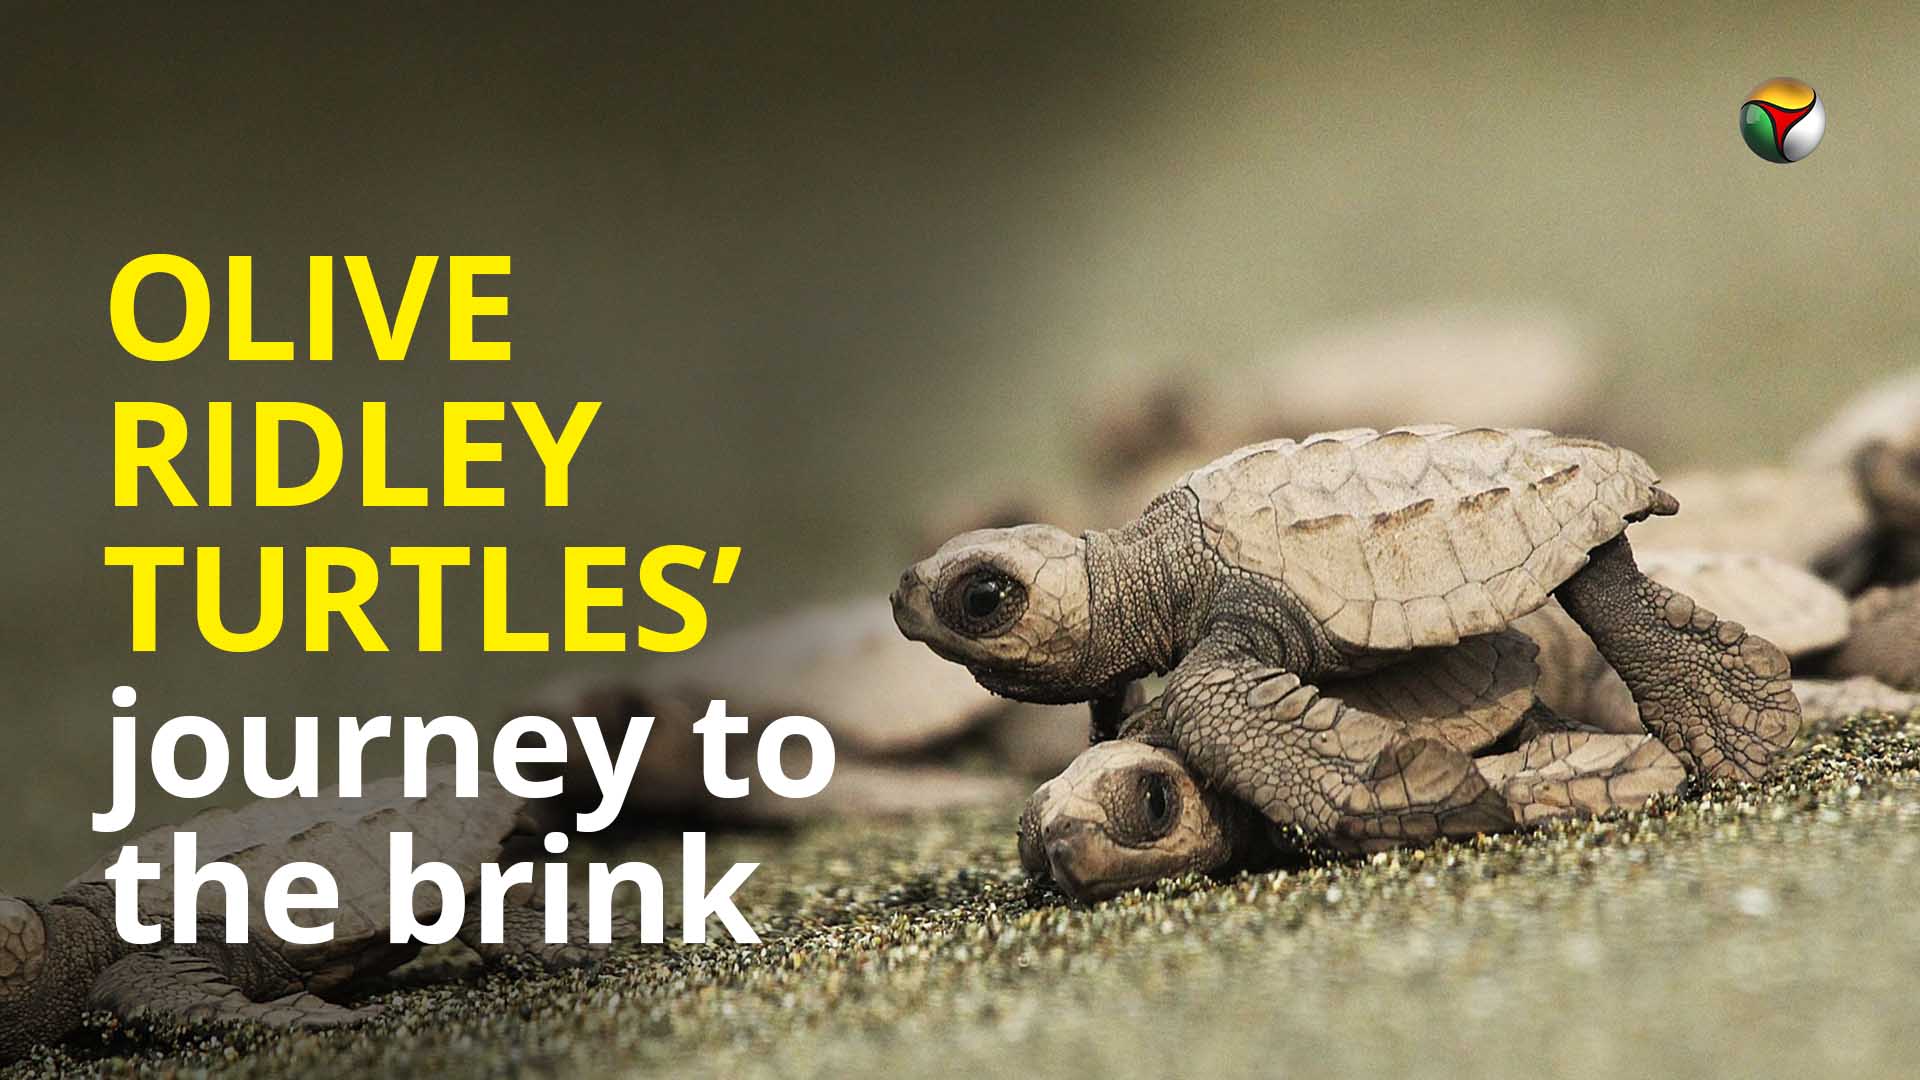 Olive Ridley Turtles journey to the brink